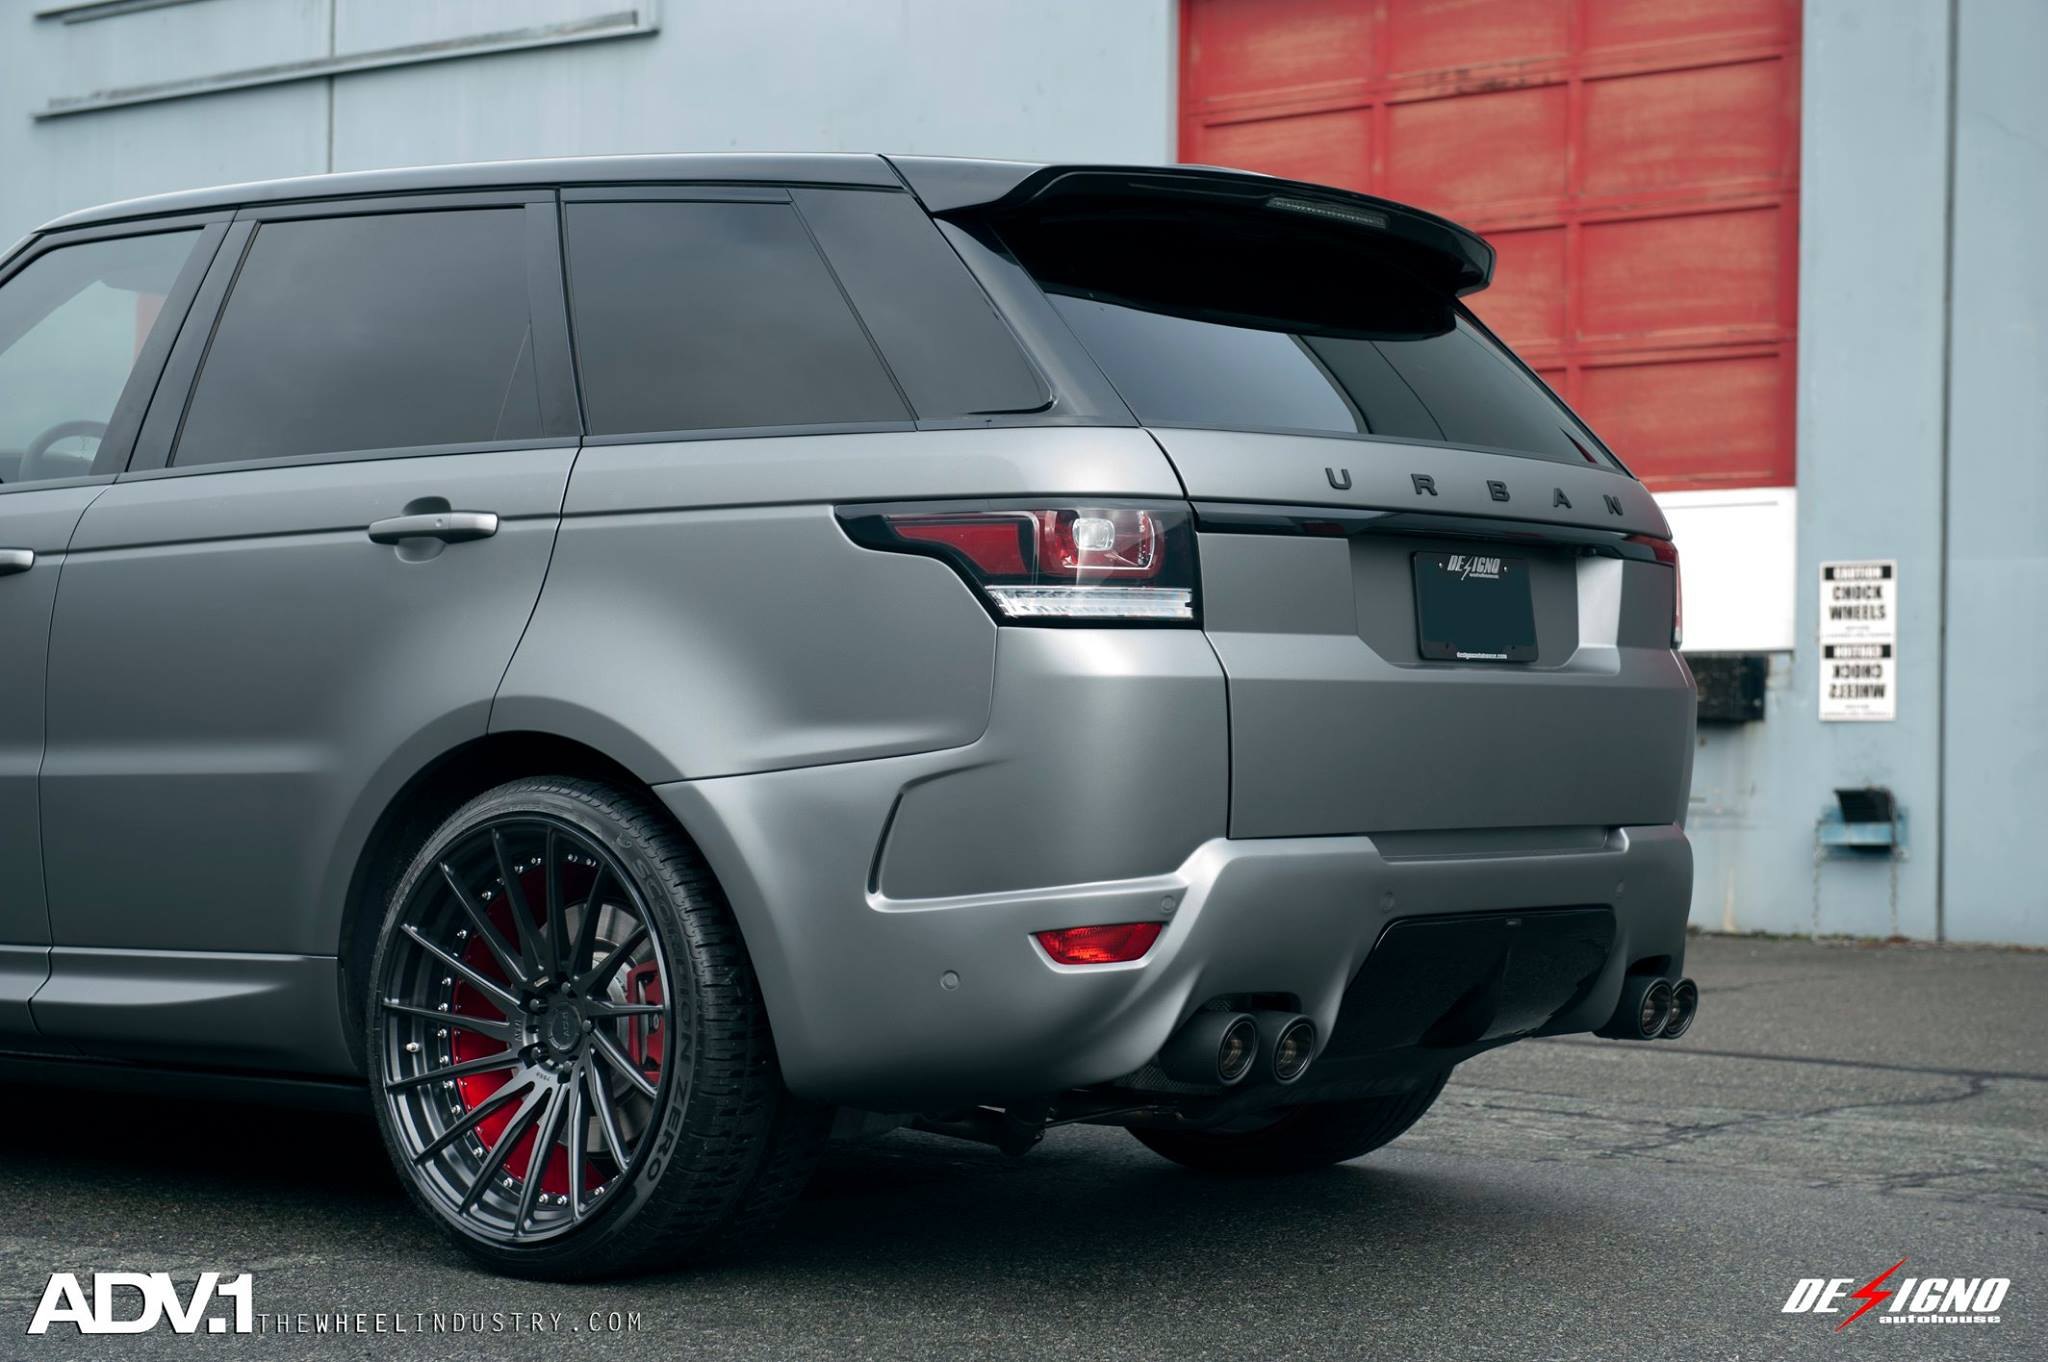 Red Smoke Taillights on Matte Gray Range Rover Sport - Photo by ADV.1